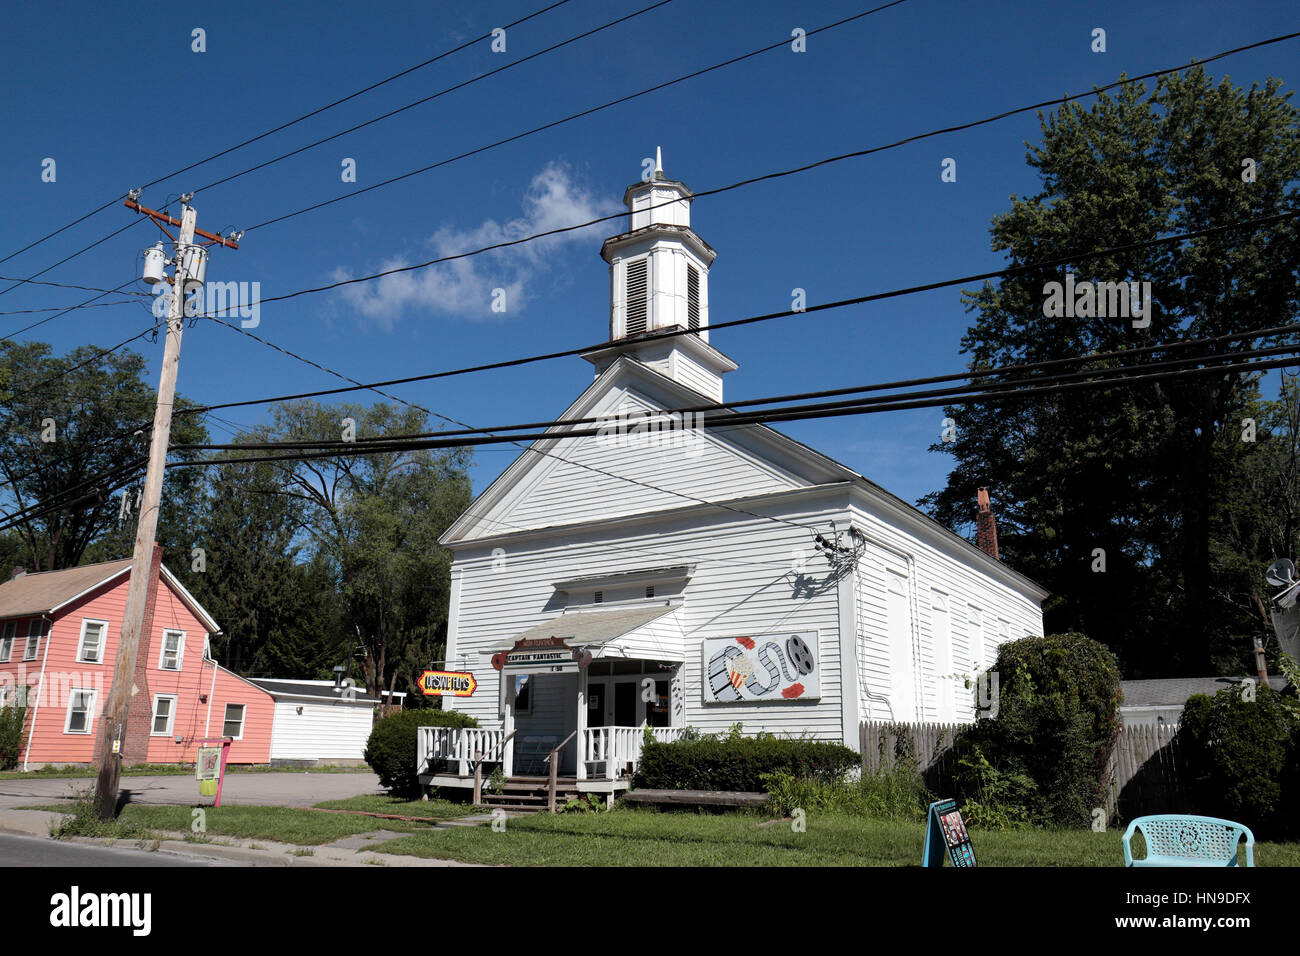 Upstate Films in Woodstock, Ulster County, New York, United States. Stock Photo